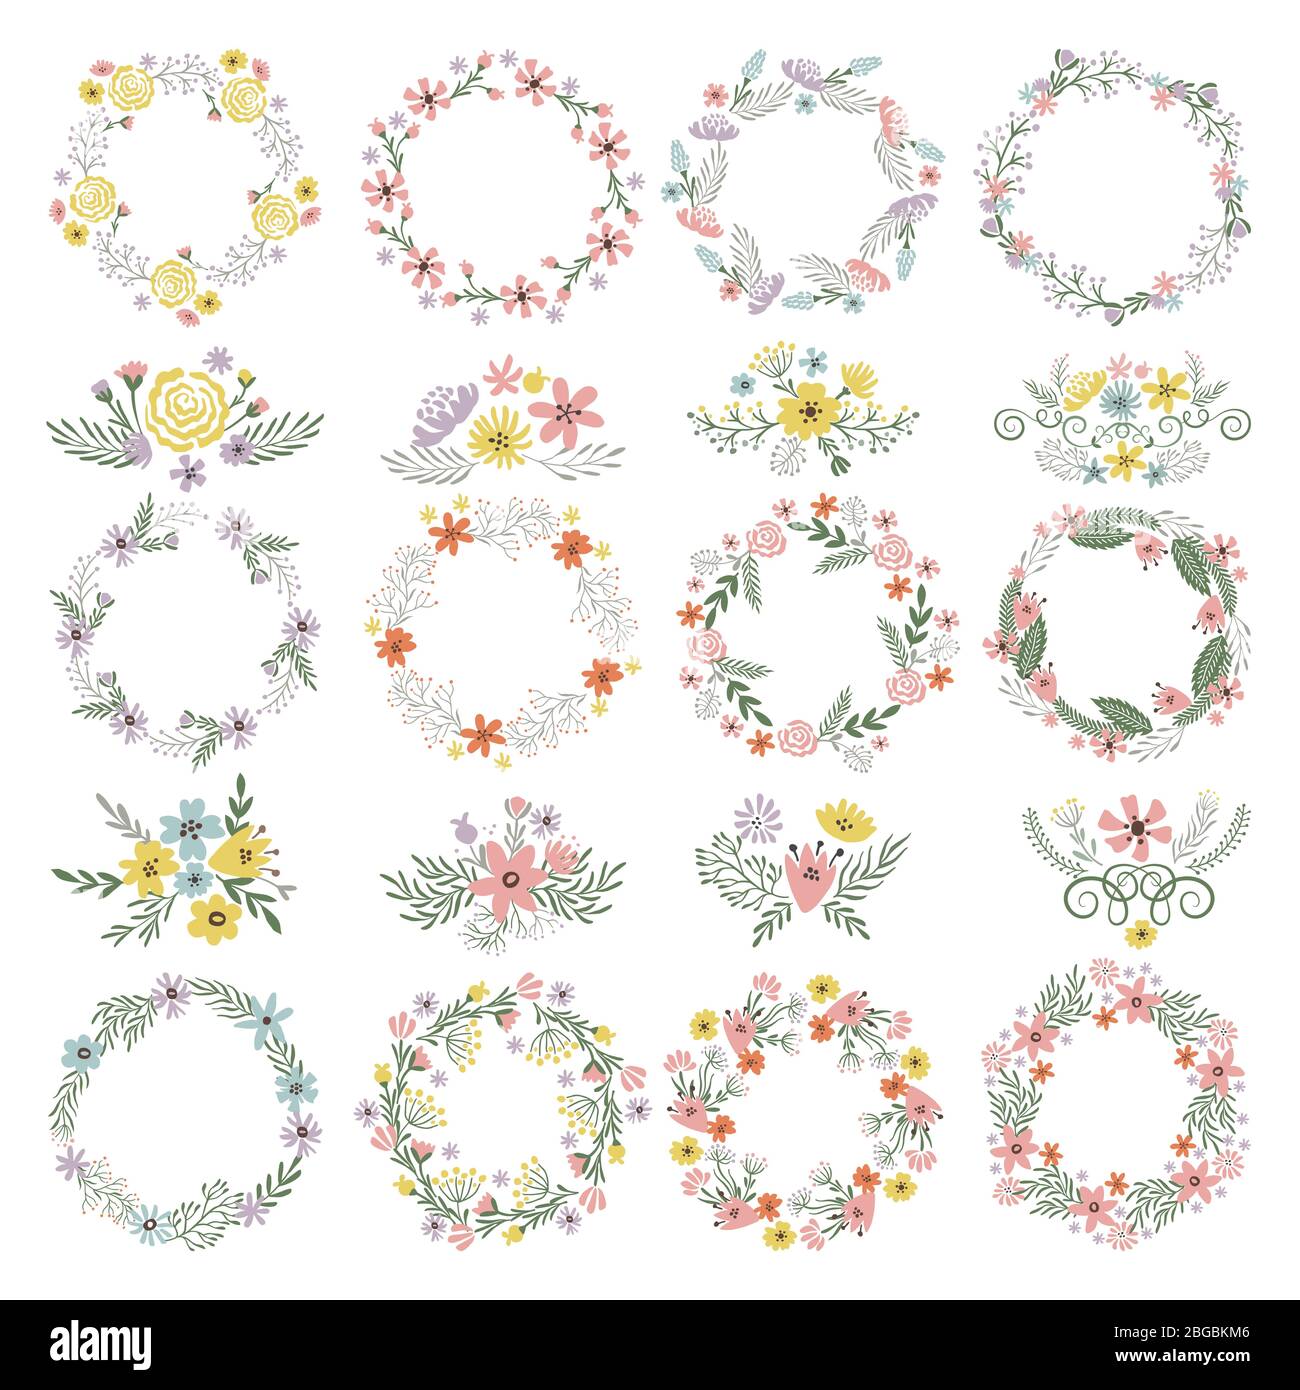 Different circle shapes with floral elements. Wedding frames vector set Stock Vector